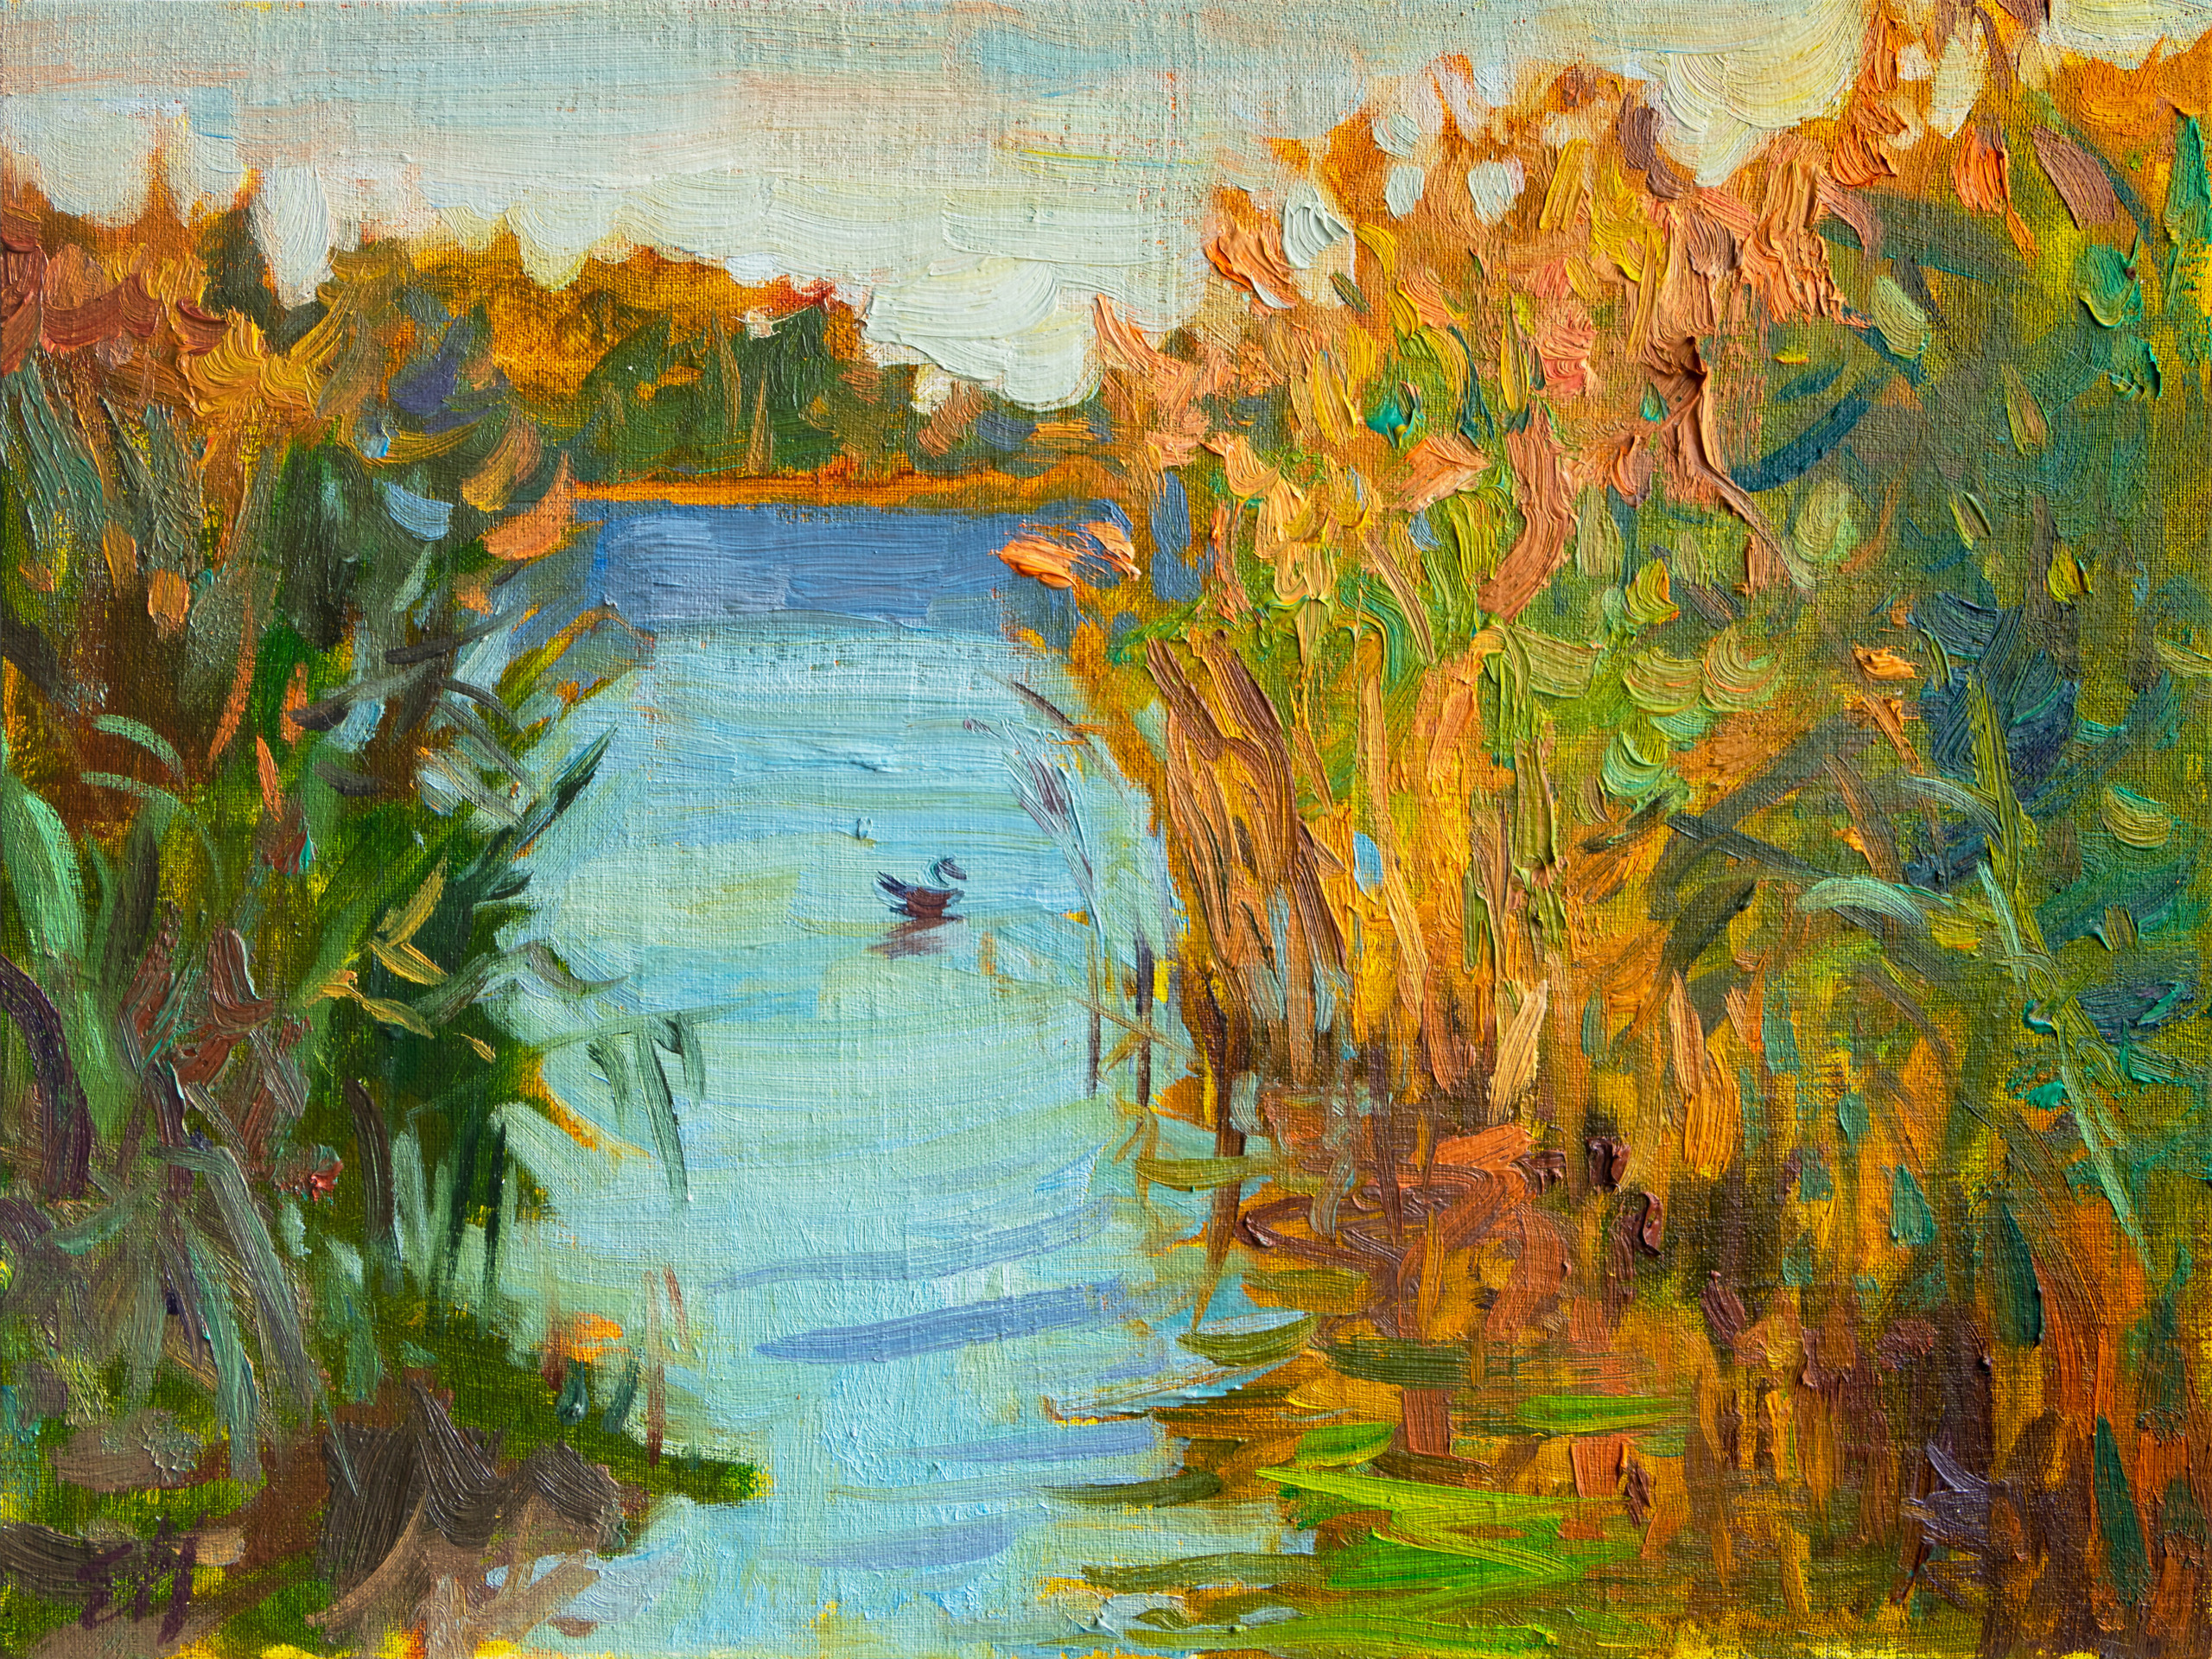 Impressionistic painting capturing a river scene illuminated by sunlight, featuring tall reeds and a duck swimming by